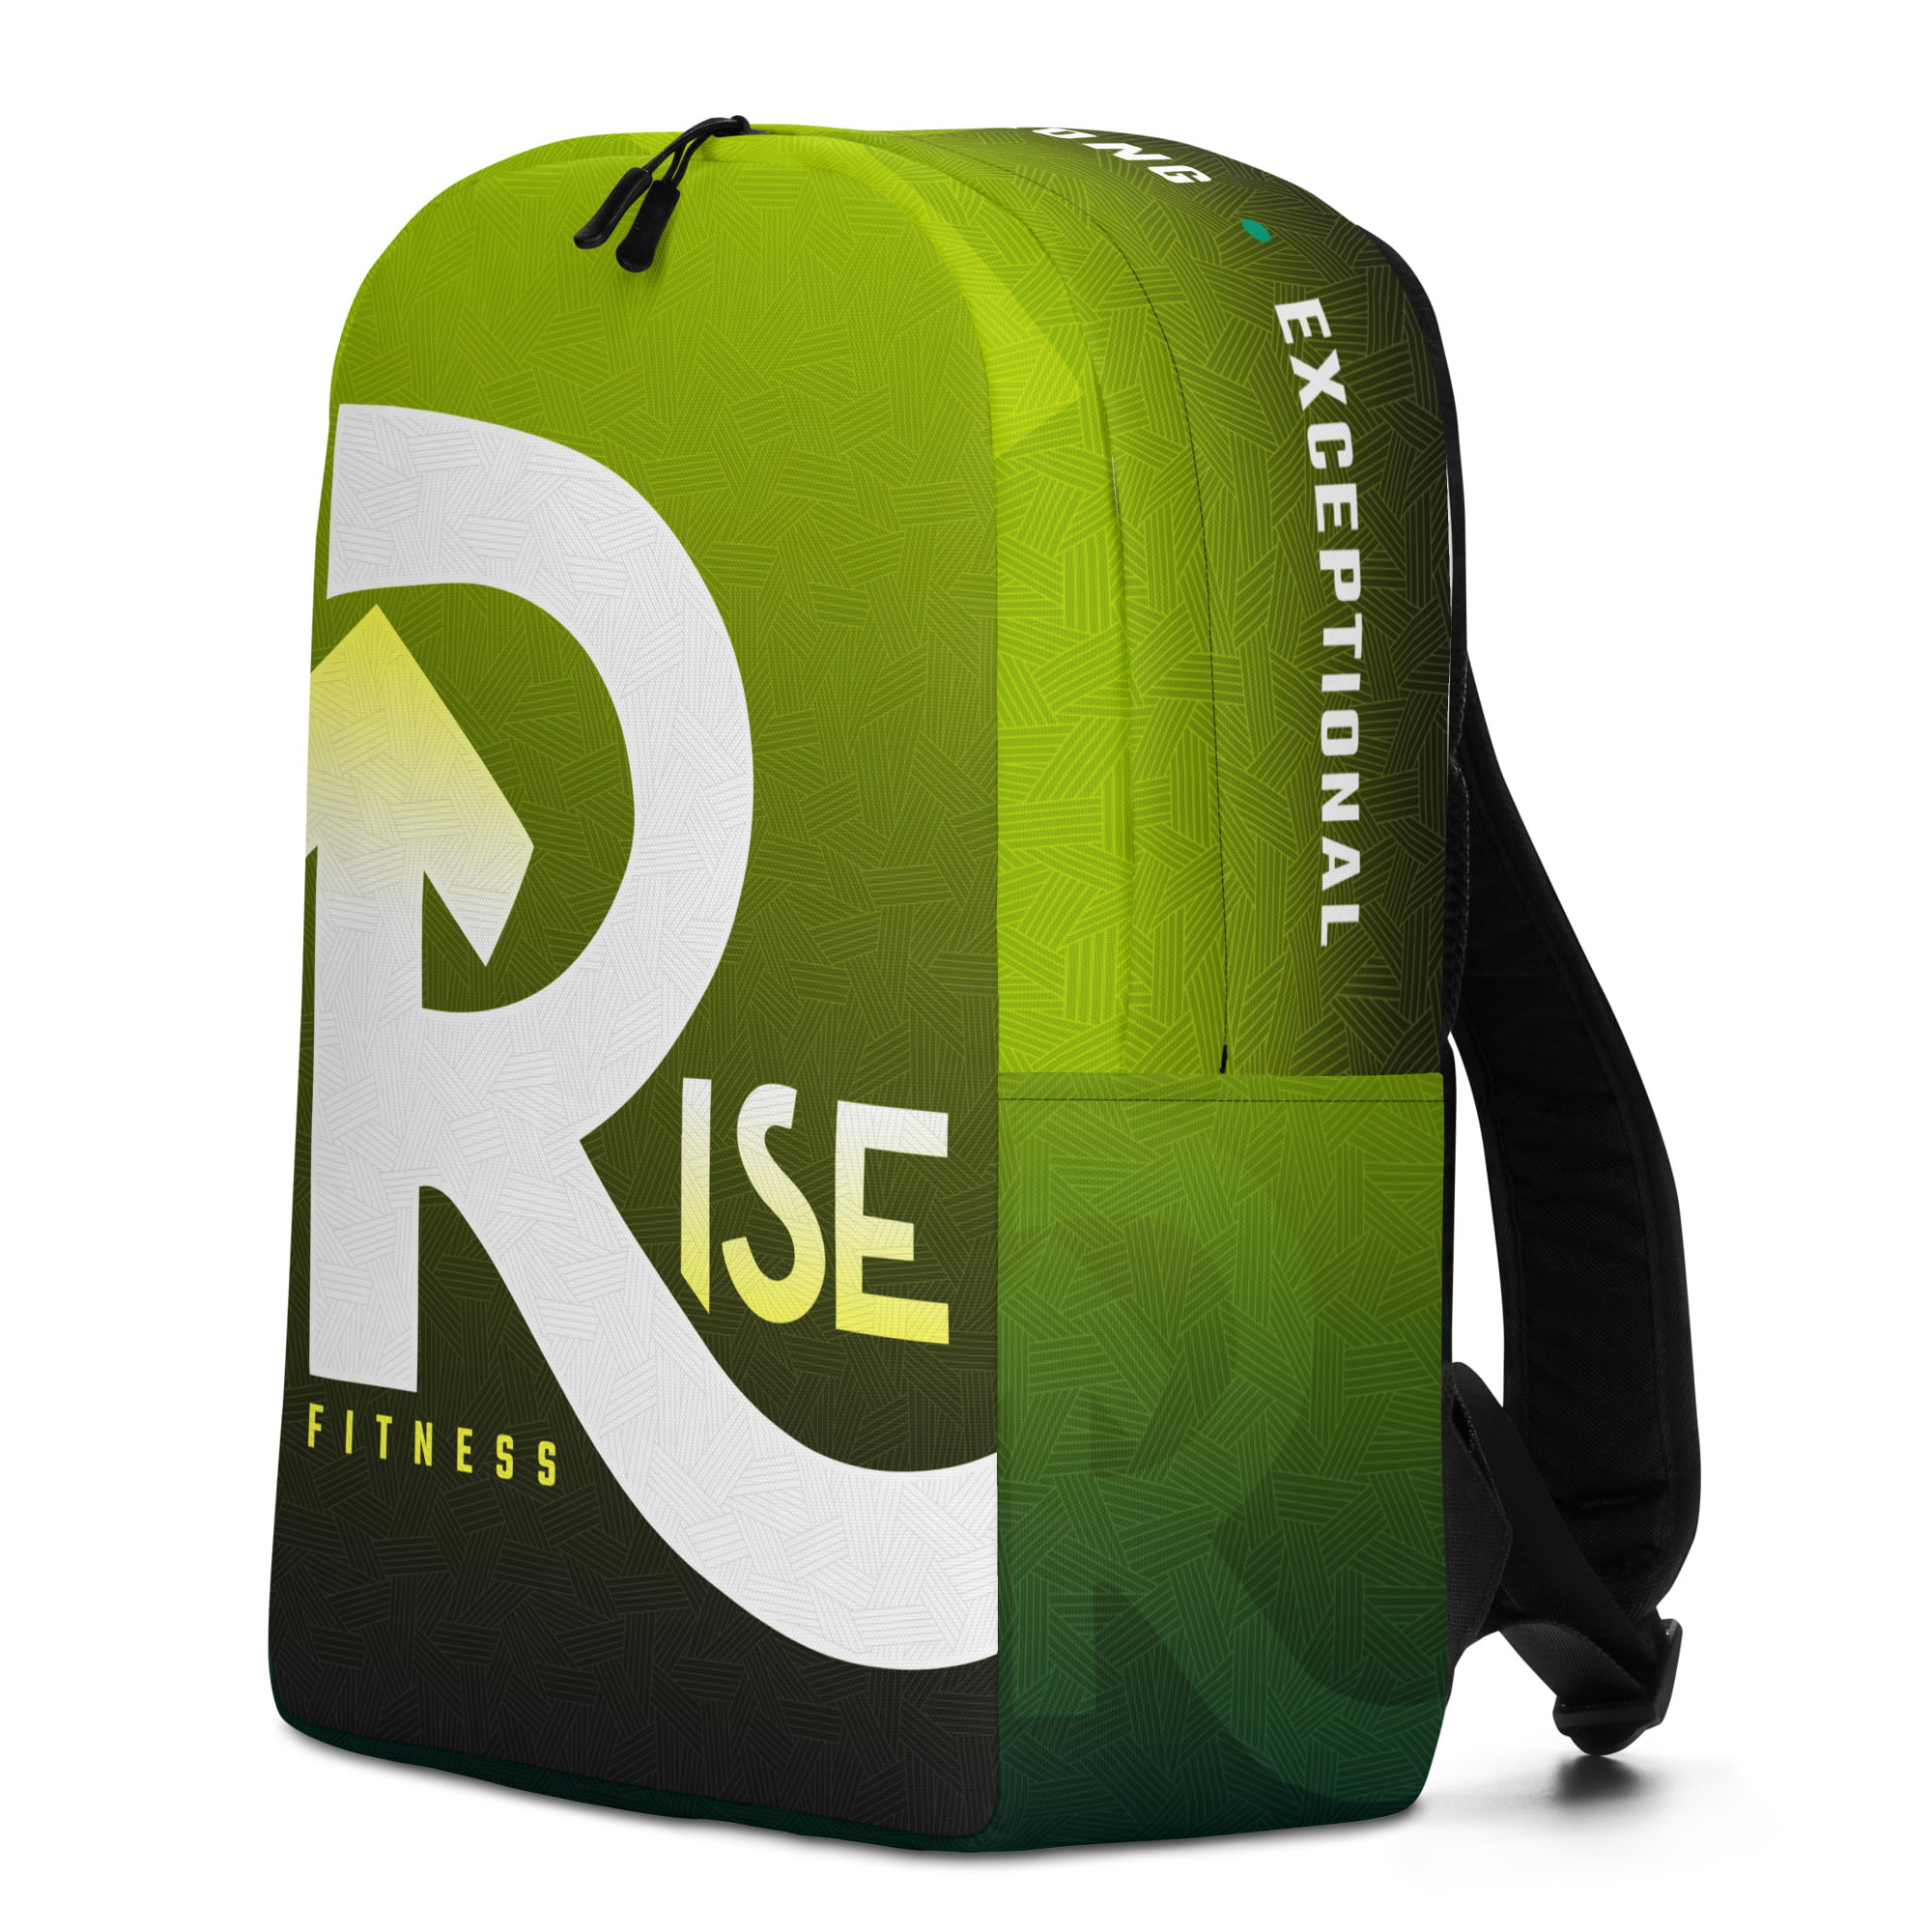 Product image for Rise Fitness Backpack